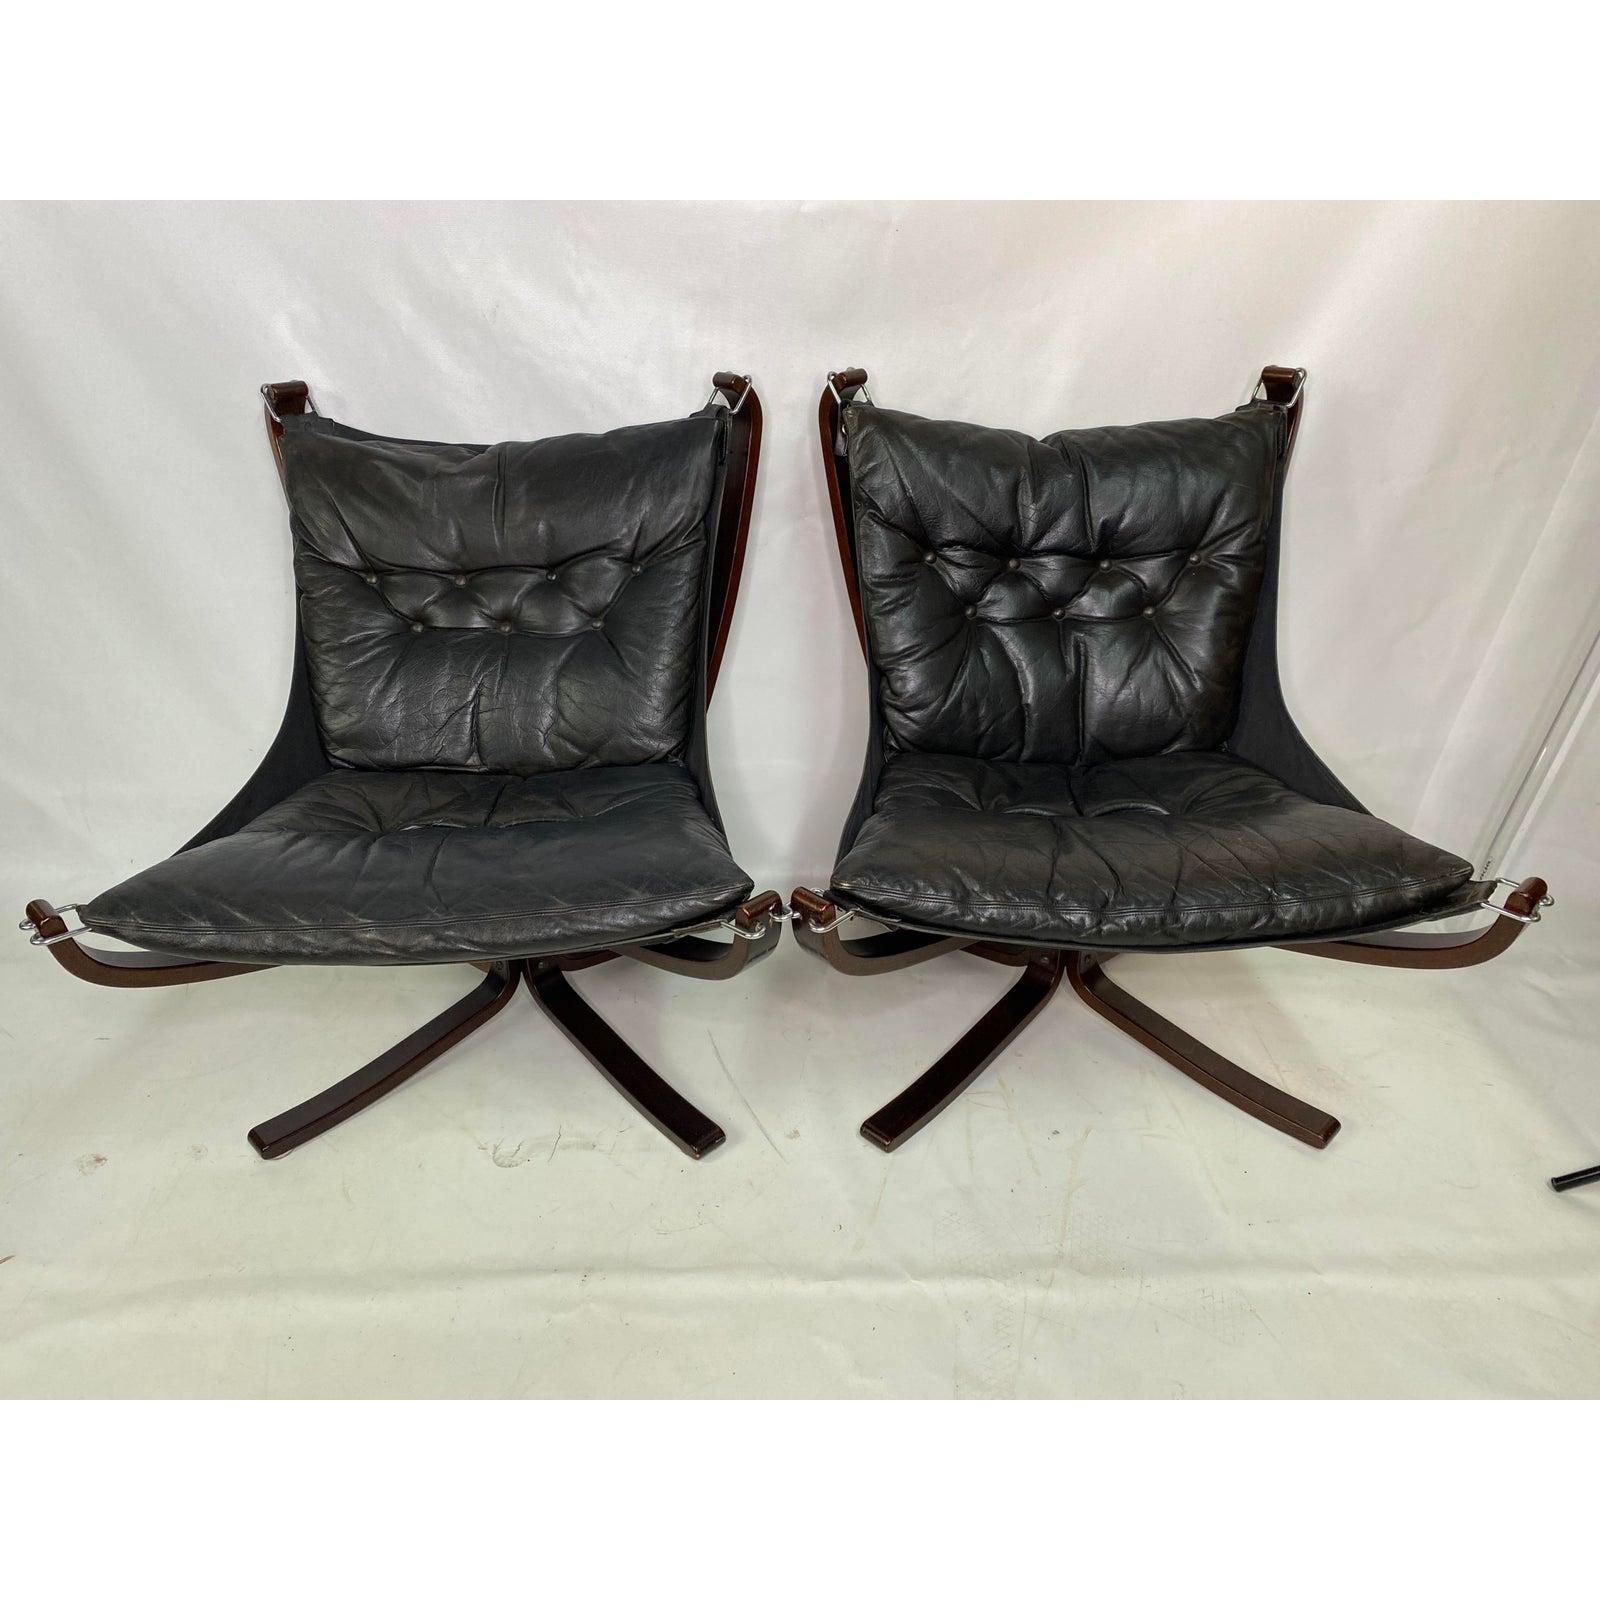 Sigurd Ressel Falcon leather lounge chairs set by Vatne Mobler - Set of 3. Here is a very nice rare fine of three matching Sigurd lounge chairs all original. One chair has a higher back. Measurements of chair are.

Measures: H: 38.5”, D: 30”, W: